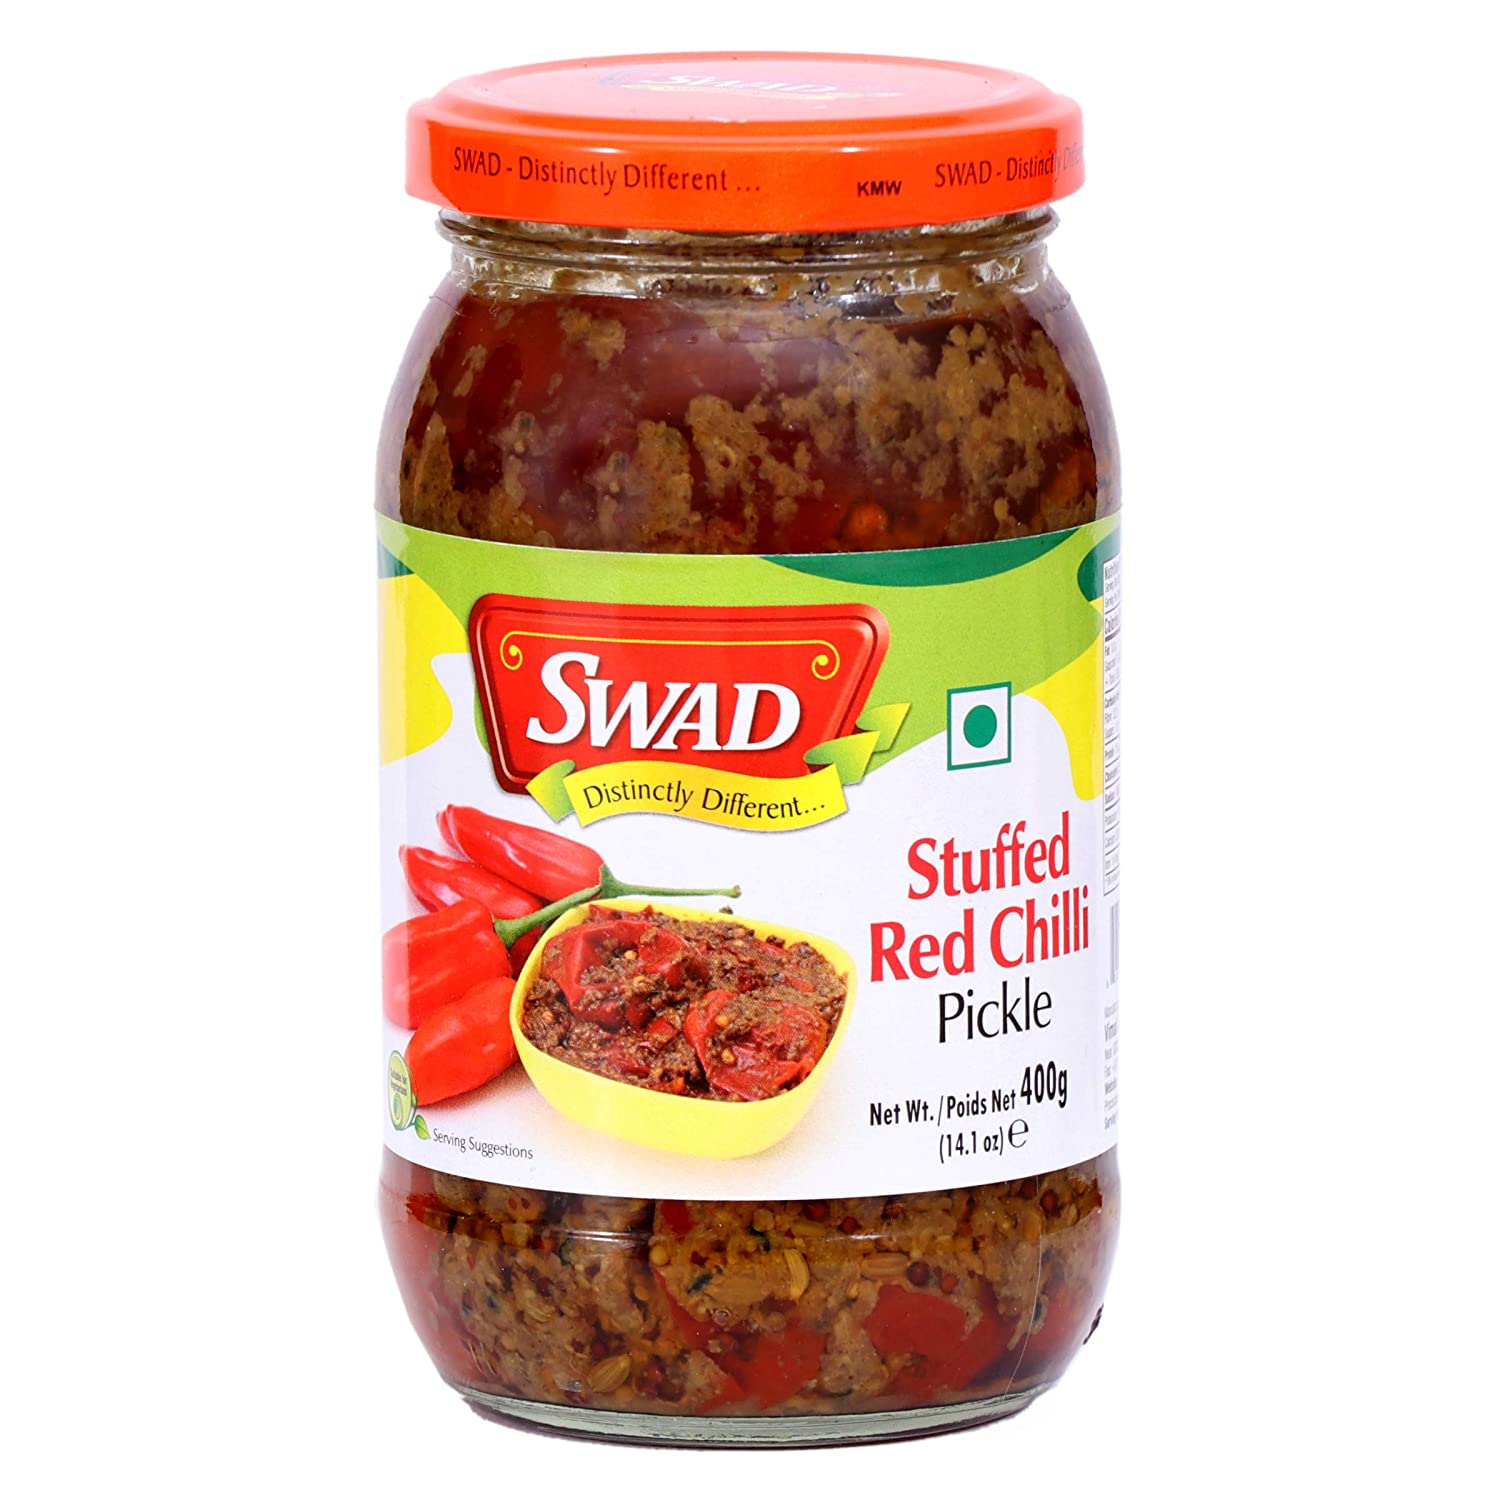 SWAD Stuffed Red ChilliPickle Image